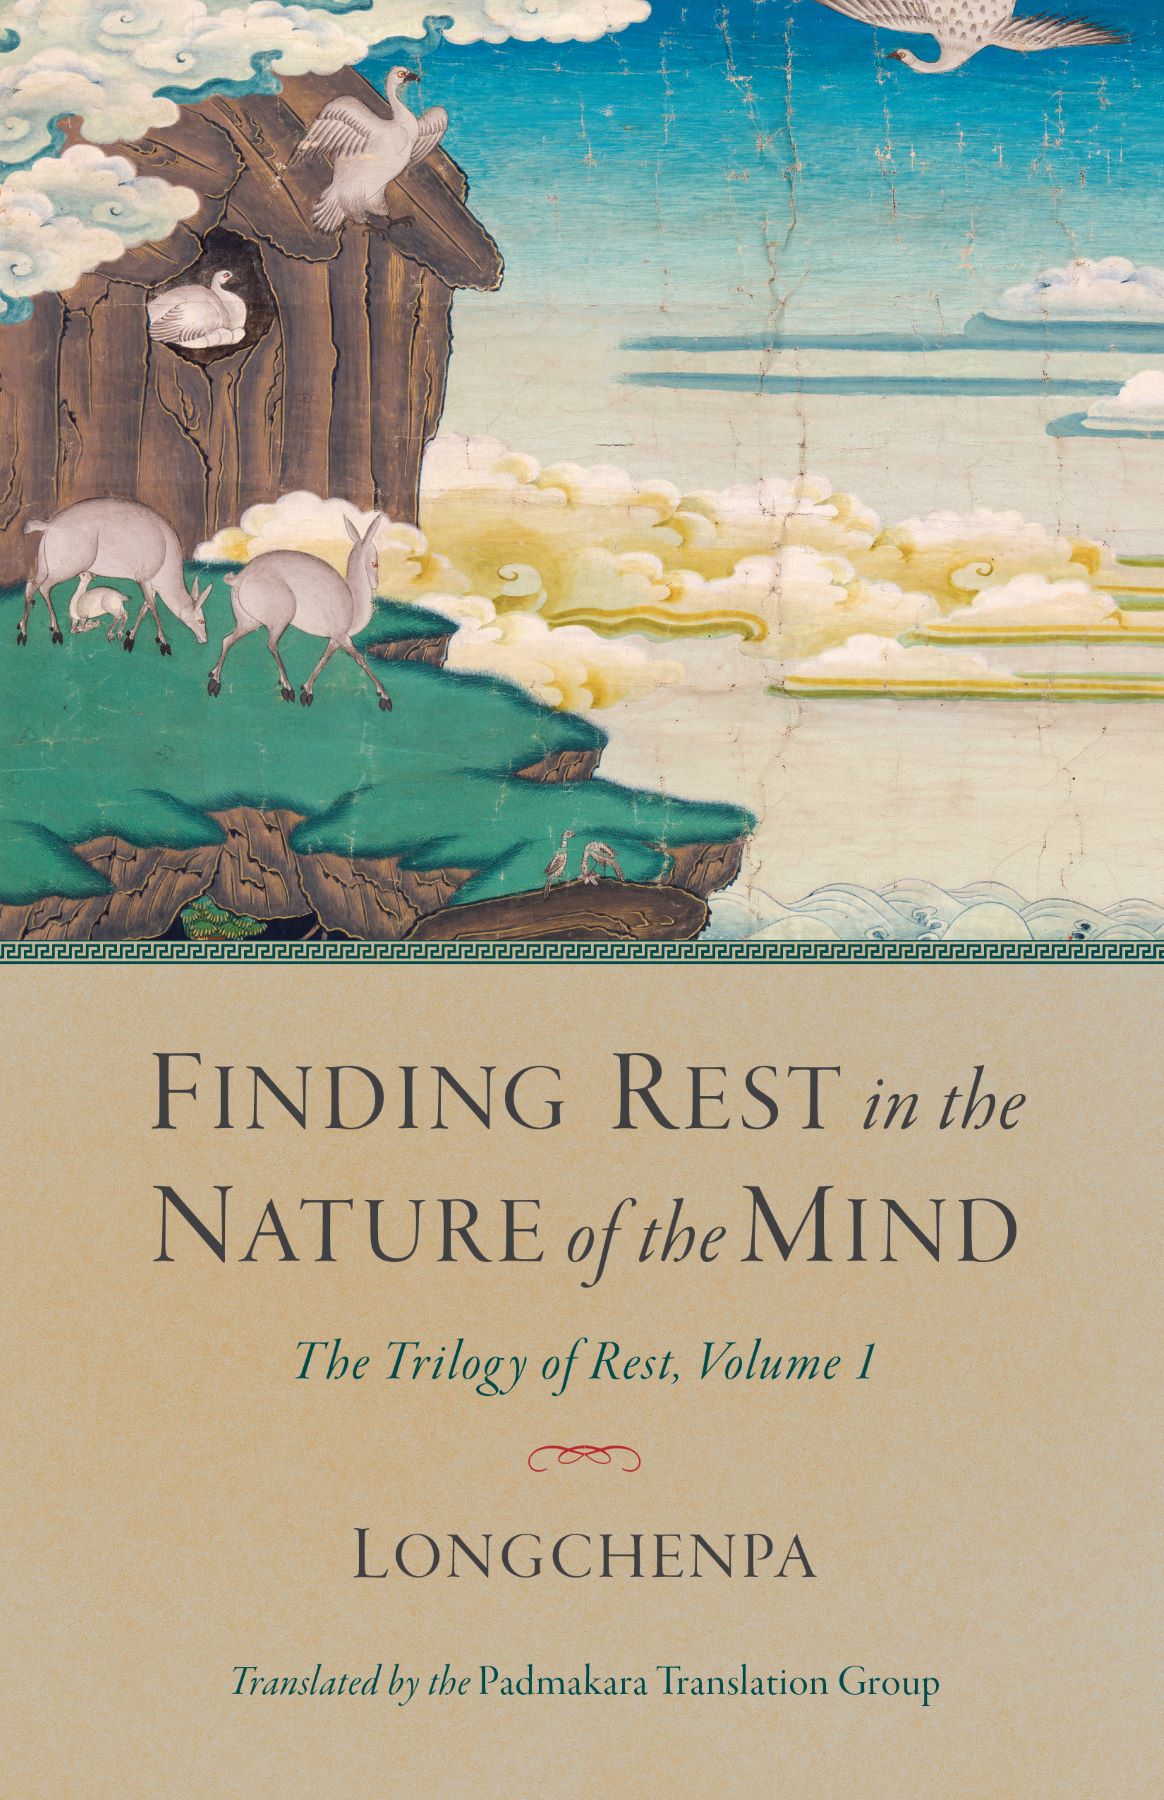 The Trilogy of Rest Paperback Volume 1 Finding Rest in the Nature of the Mind